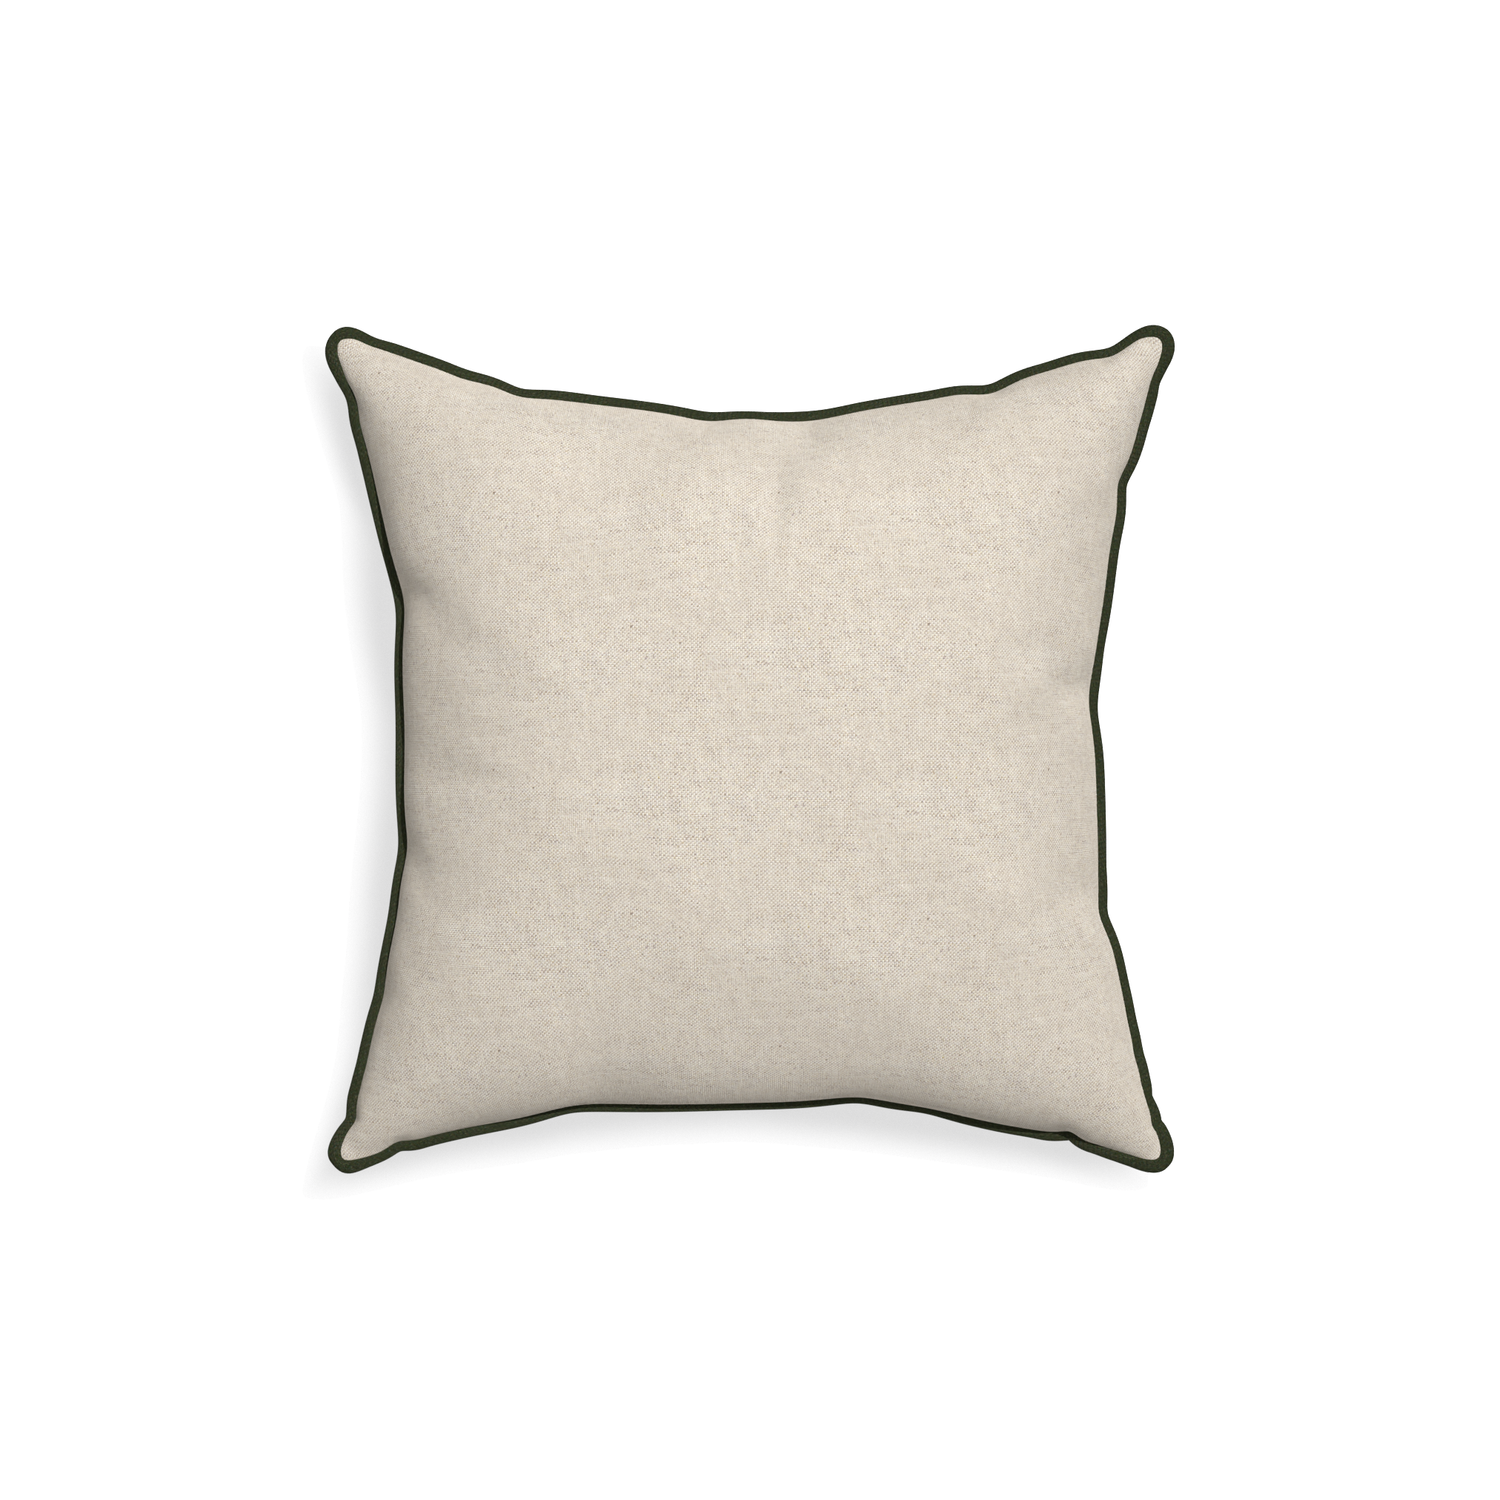 18-square oat custom light brownpillow with f piping on white background